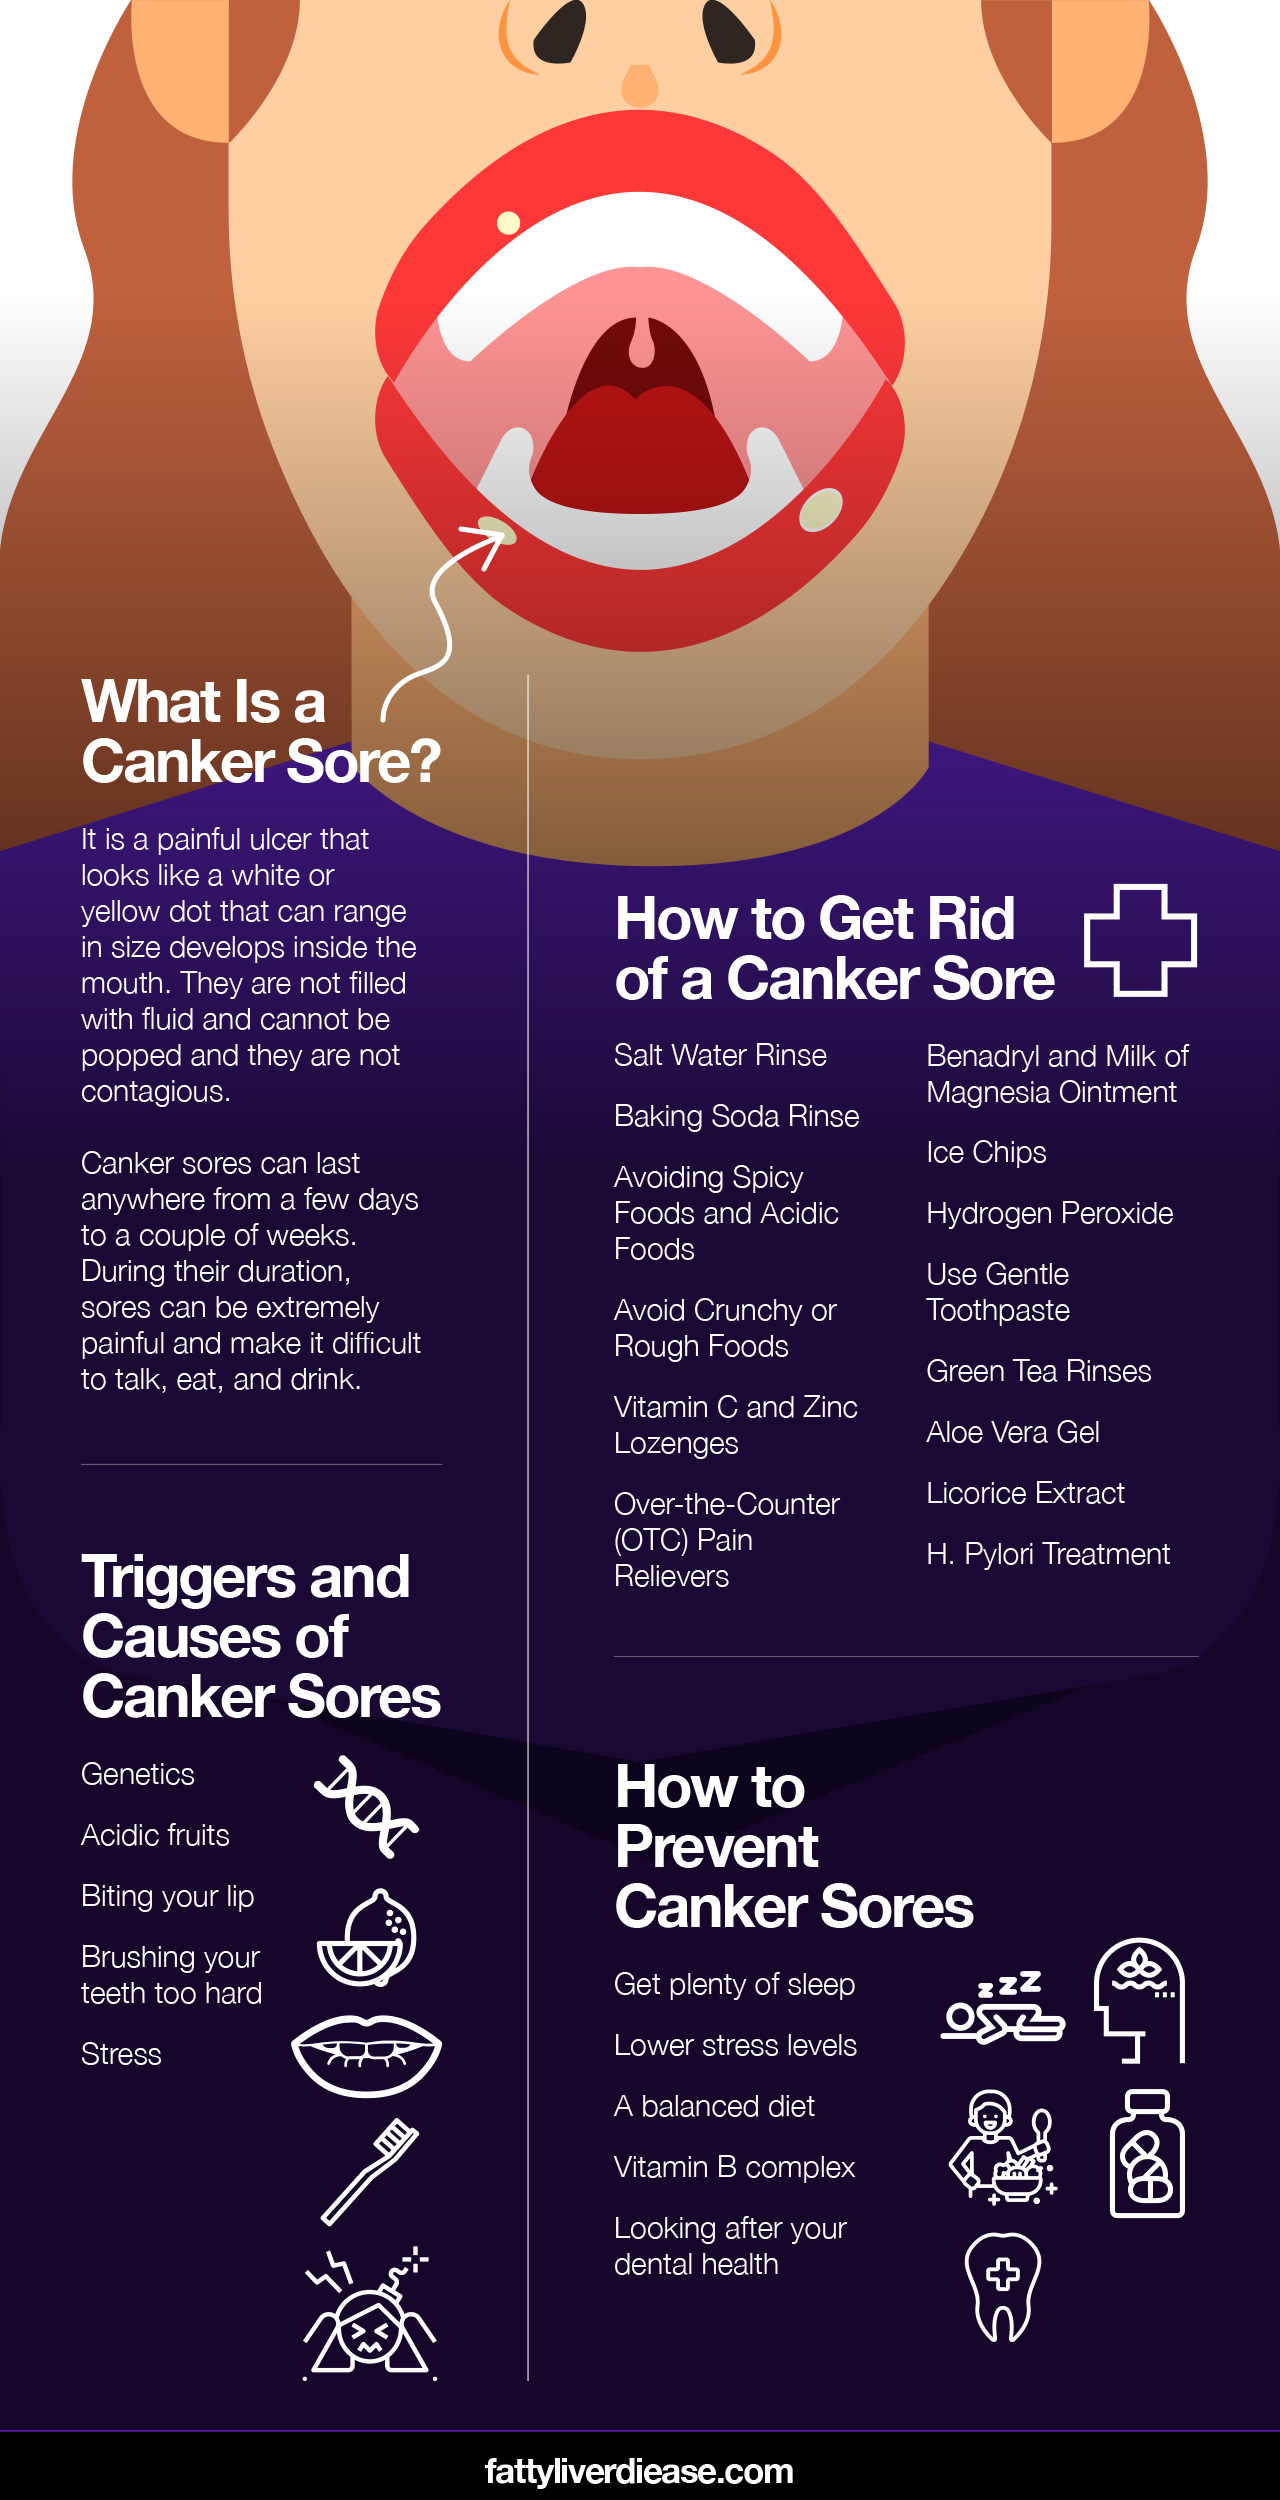 What Is a Canker Sore?